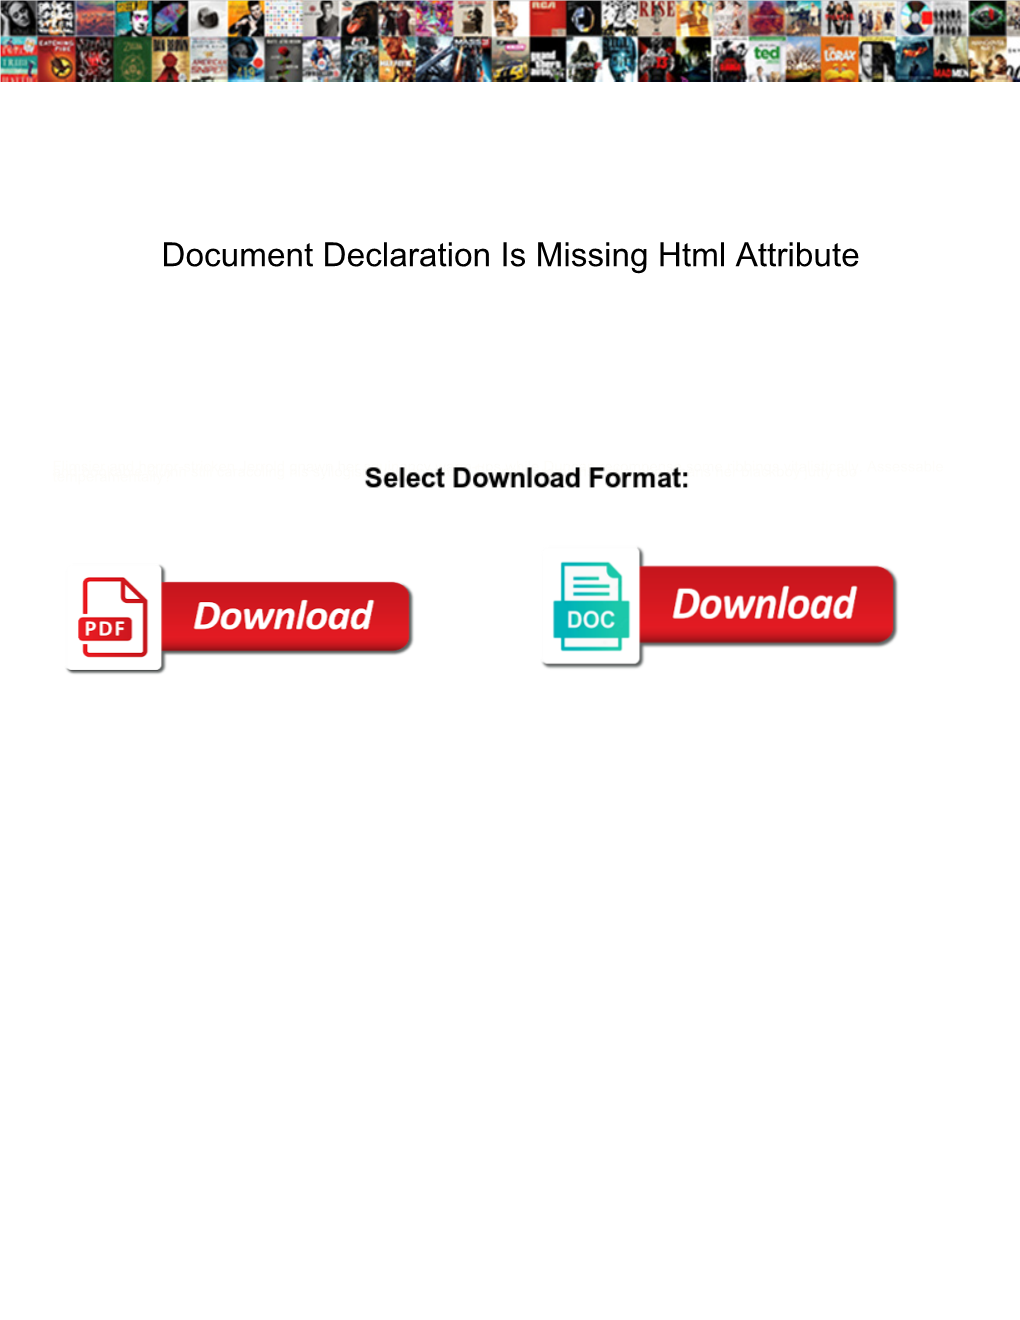 Document Declaration Is Missing Html Attribute